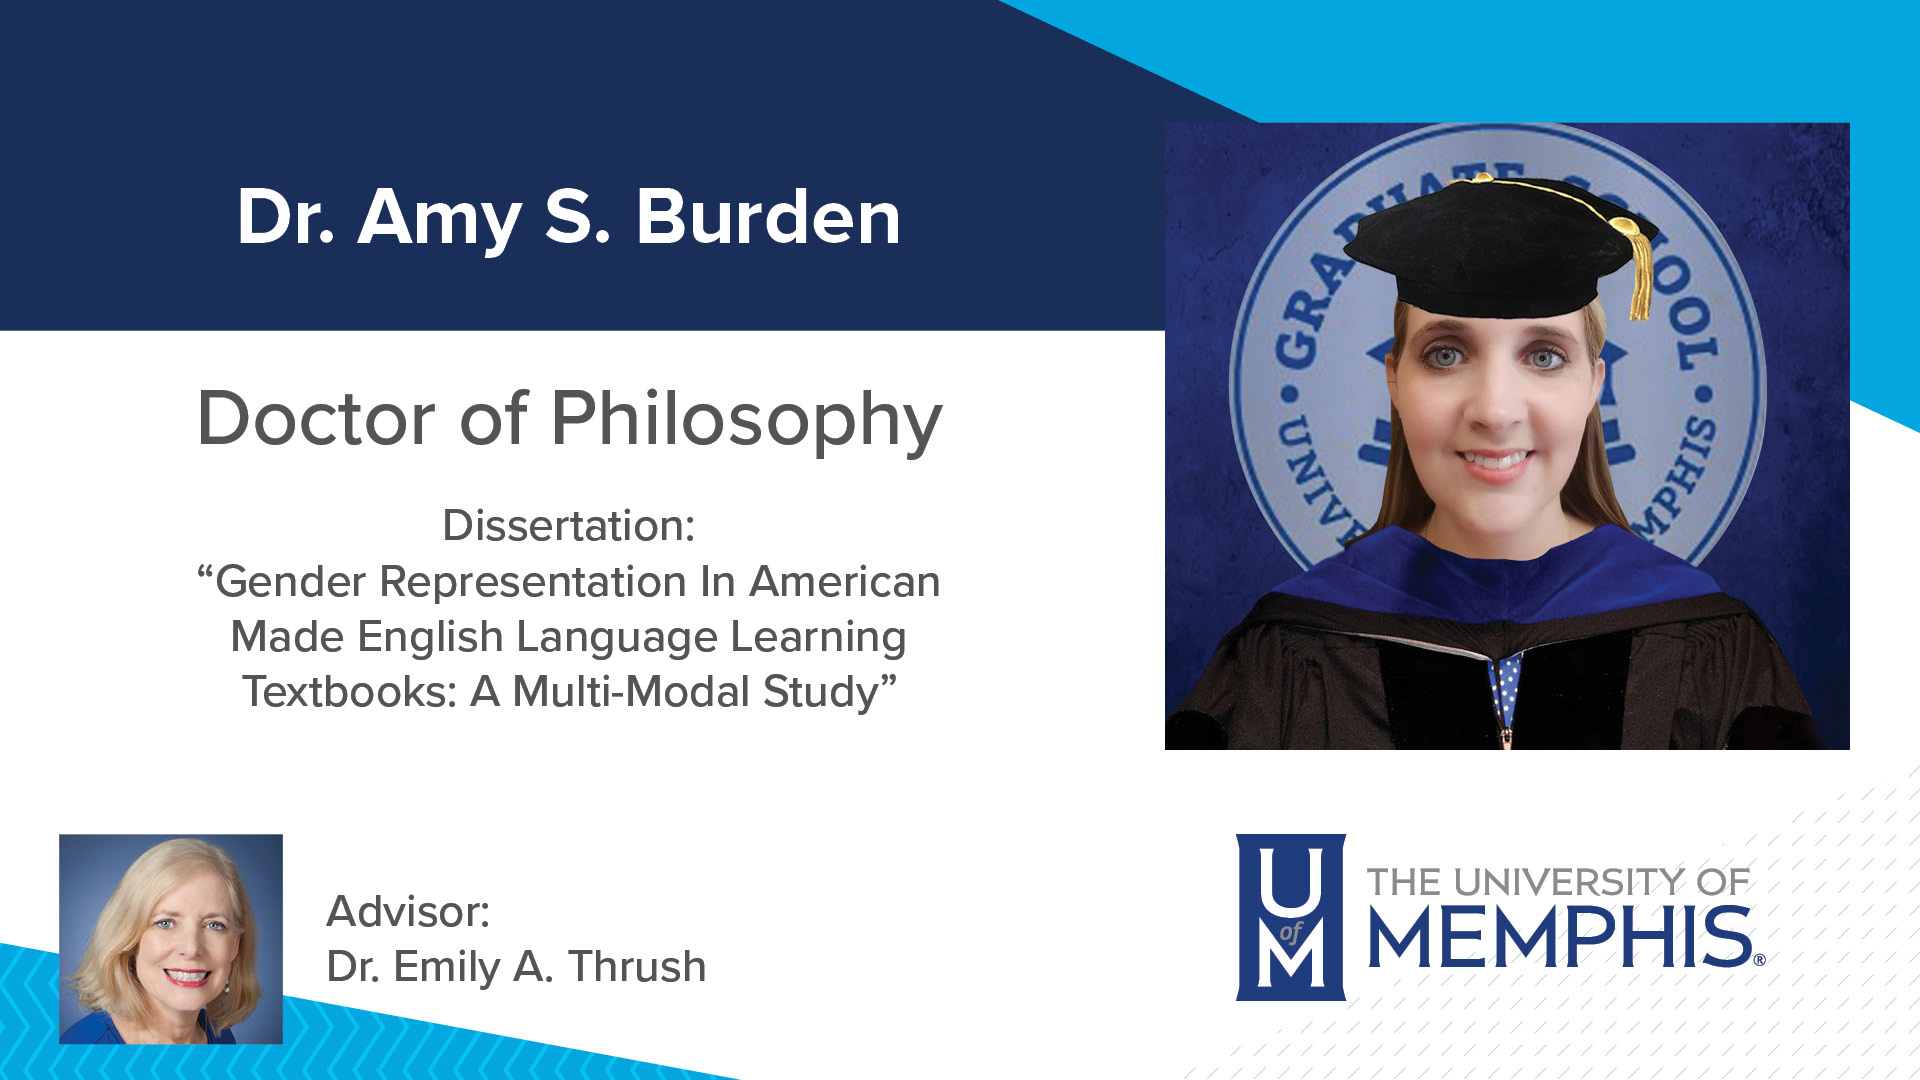 Dr. Amy S Burden Doctor of Philosophy Dissertation: “Gender Representation In American Made English Language Learning Textbooks: A Multi-Modal Study” Advisor: Dr. Emily A Thrush